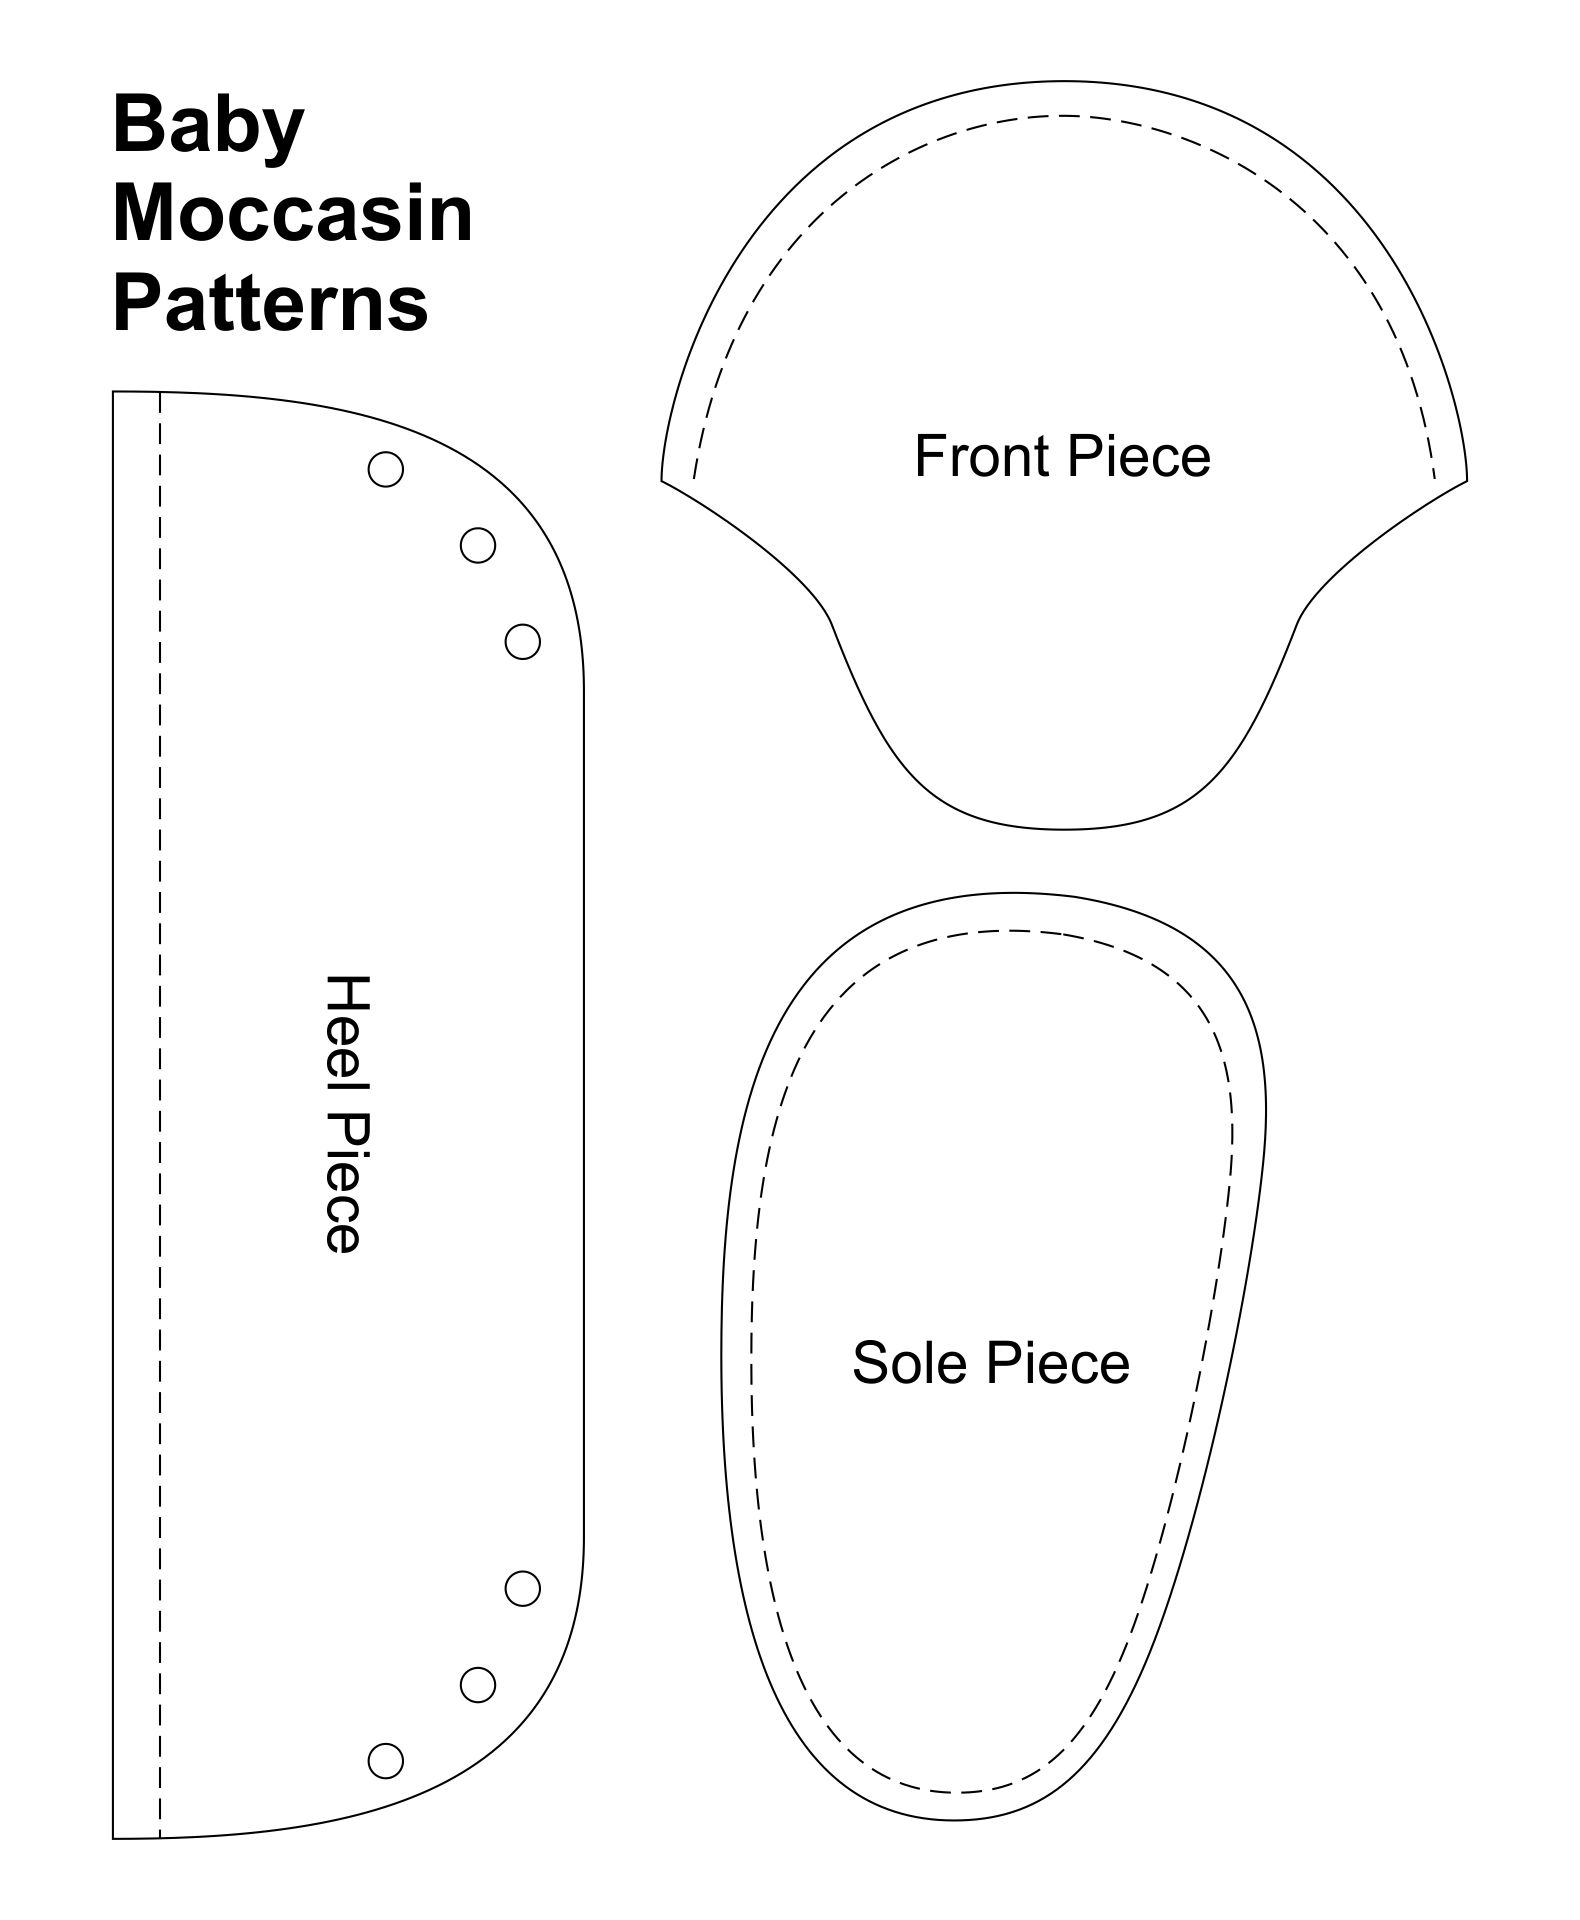 4 Best Images of Baby Moccasin Pattern Printable - Free Baby Moccasin ...